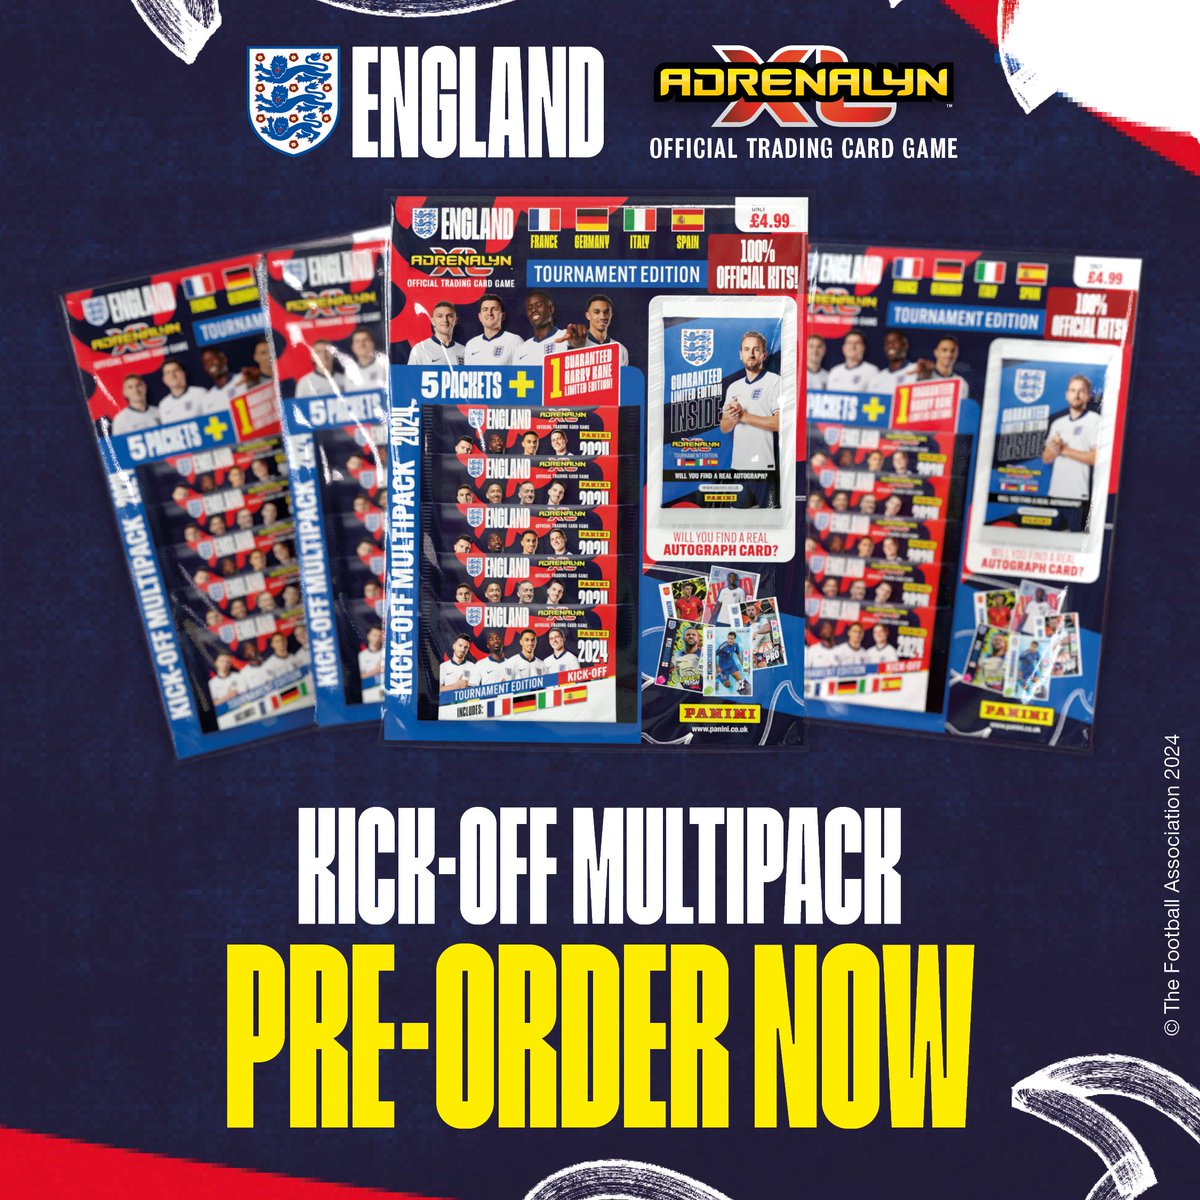 Pre-order now! bit.ly/4aNe5sC Start your collection early with a preview mix of the England Adrenalyn XL™ 2024 Tournament Edition Official Trading Card Game. Each Multipack contains 5 packets, plus the Harry Kane Limited Edition card! Will you find a REAL autograph?